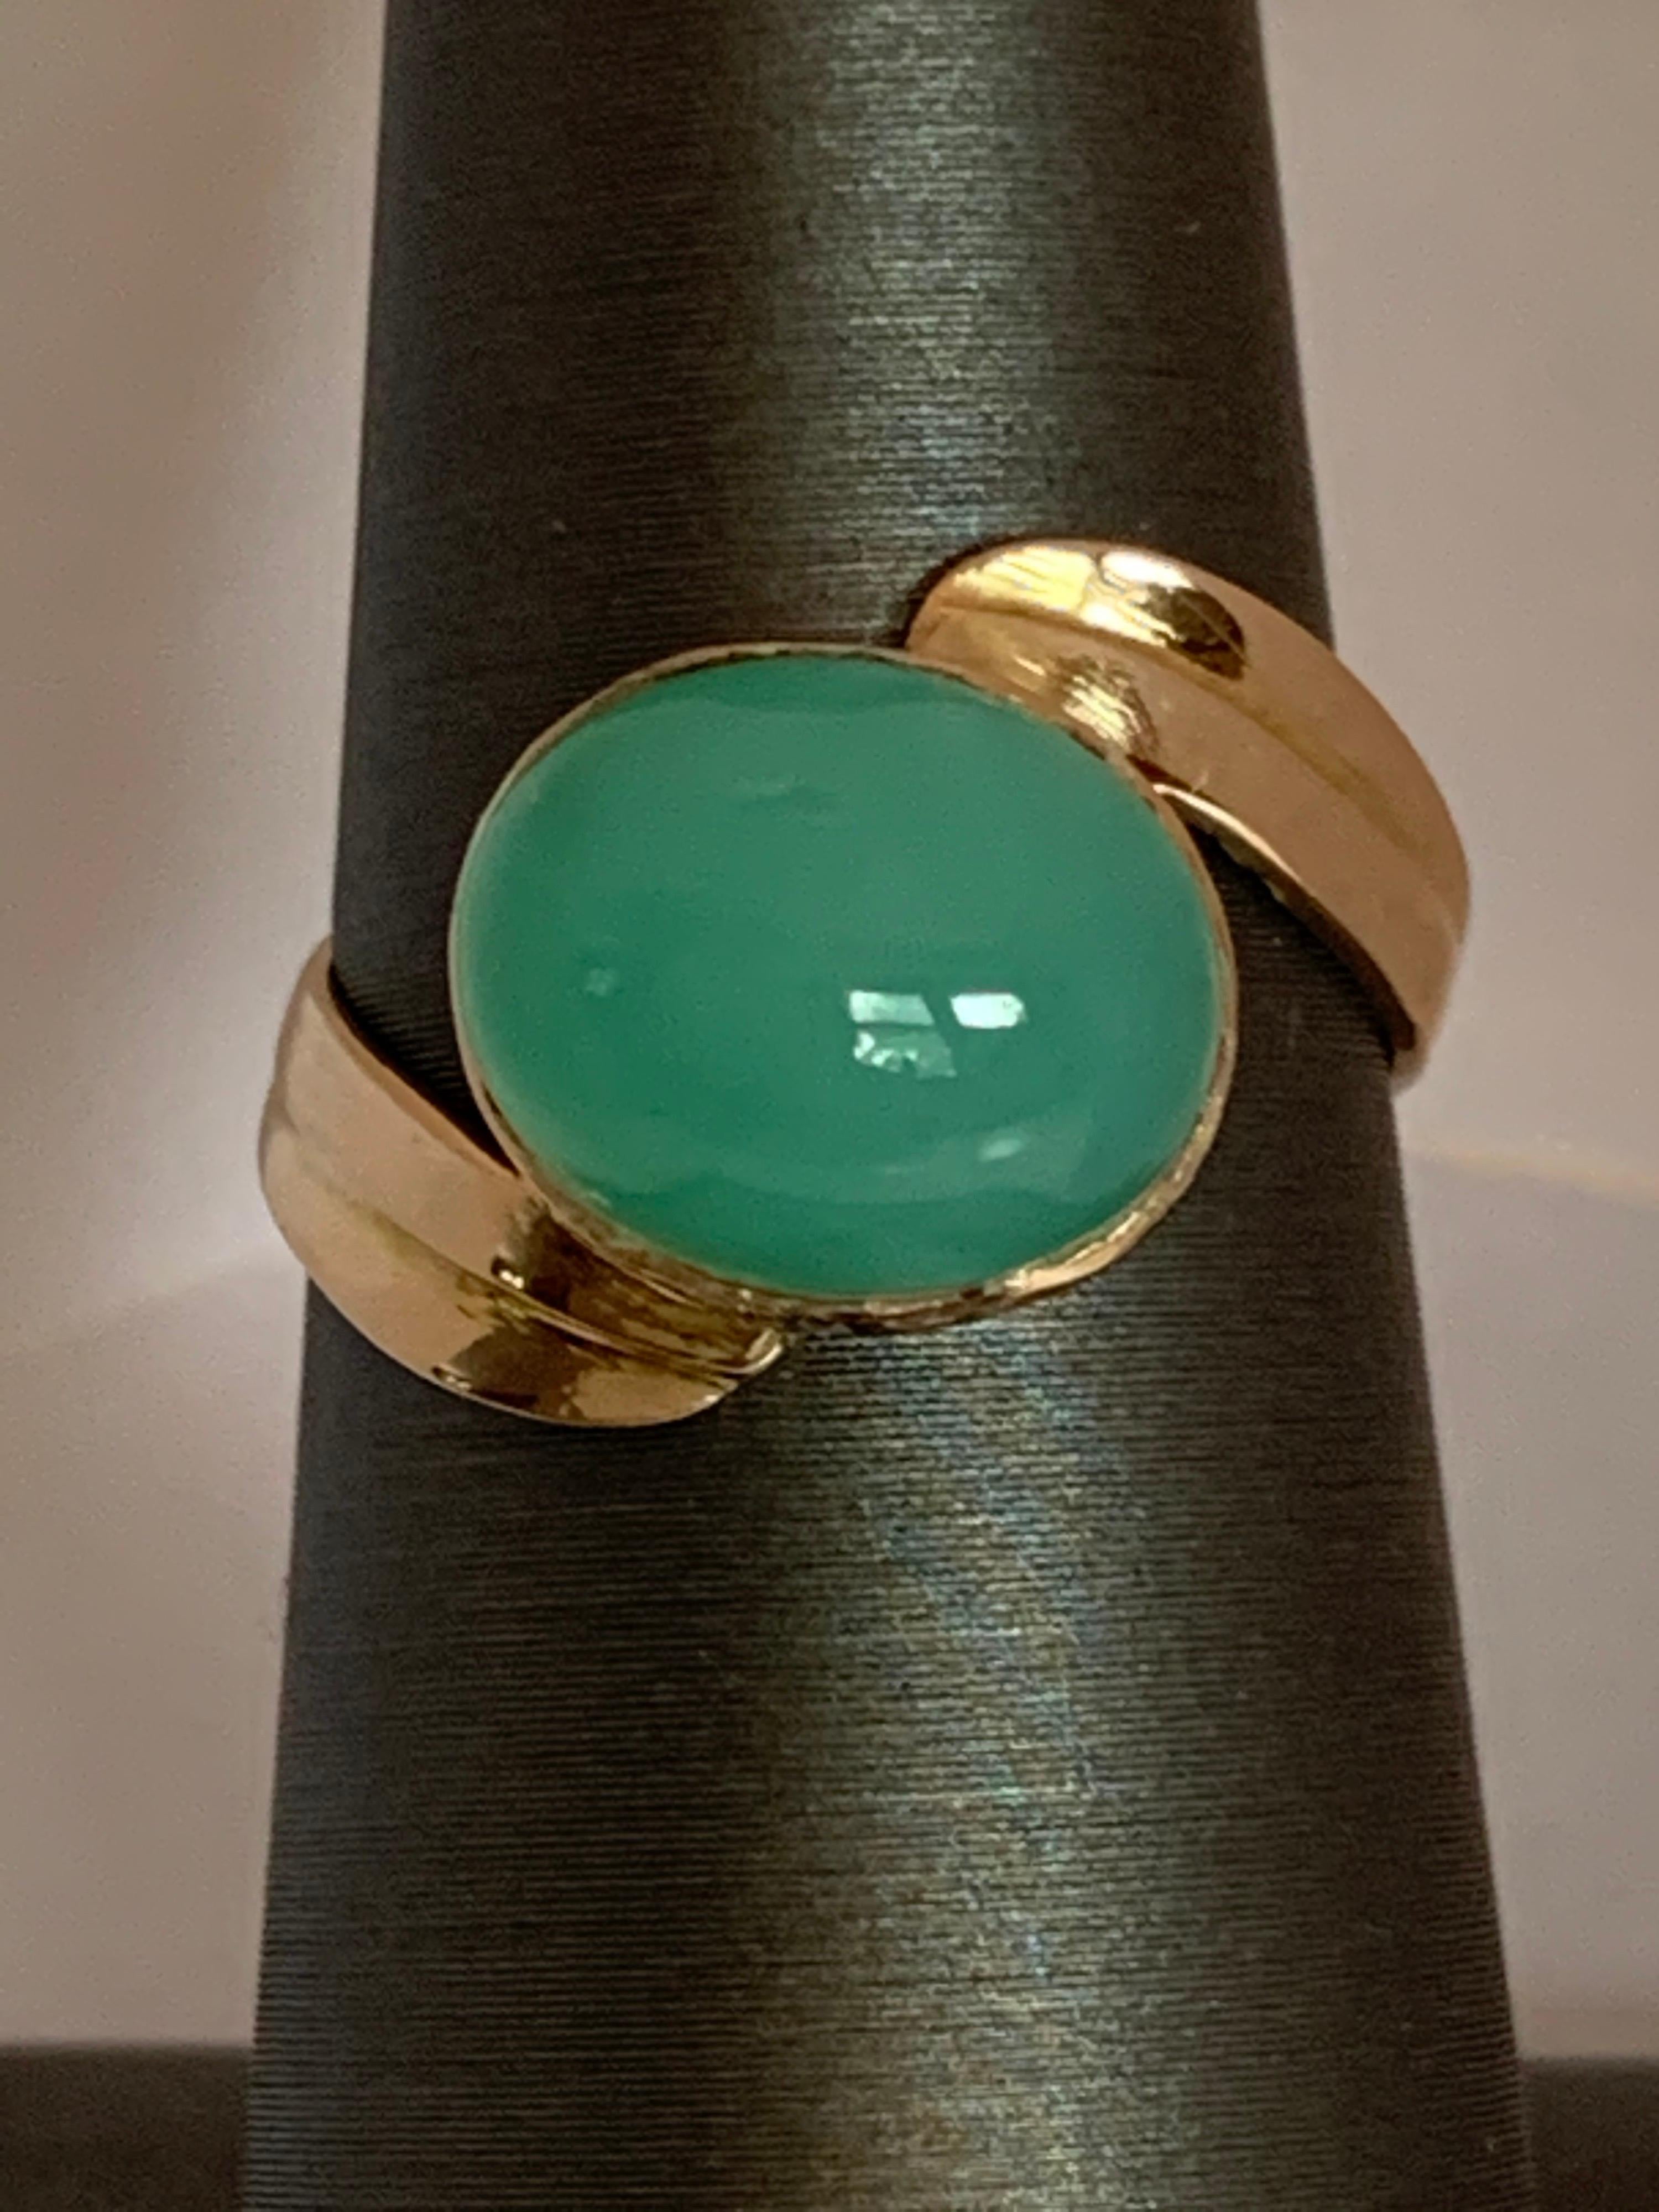 Beautiful Oval Chrysoprase set in 14 Karat Yellow gold is handcrafted size able 7 ring. The Ring is one of a kind and approx weight of the stone is 6 carat and measures 8mm X 10mm 